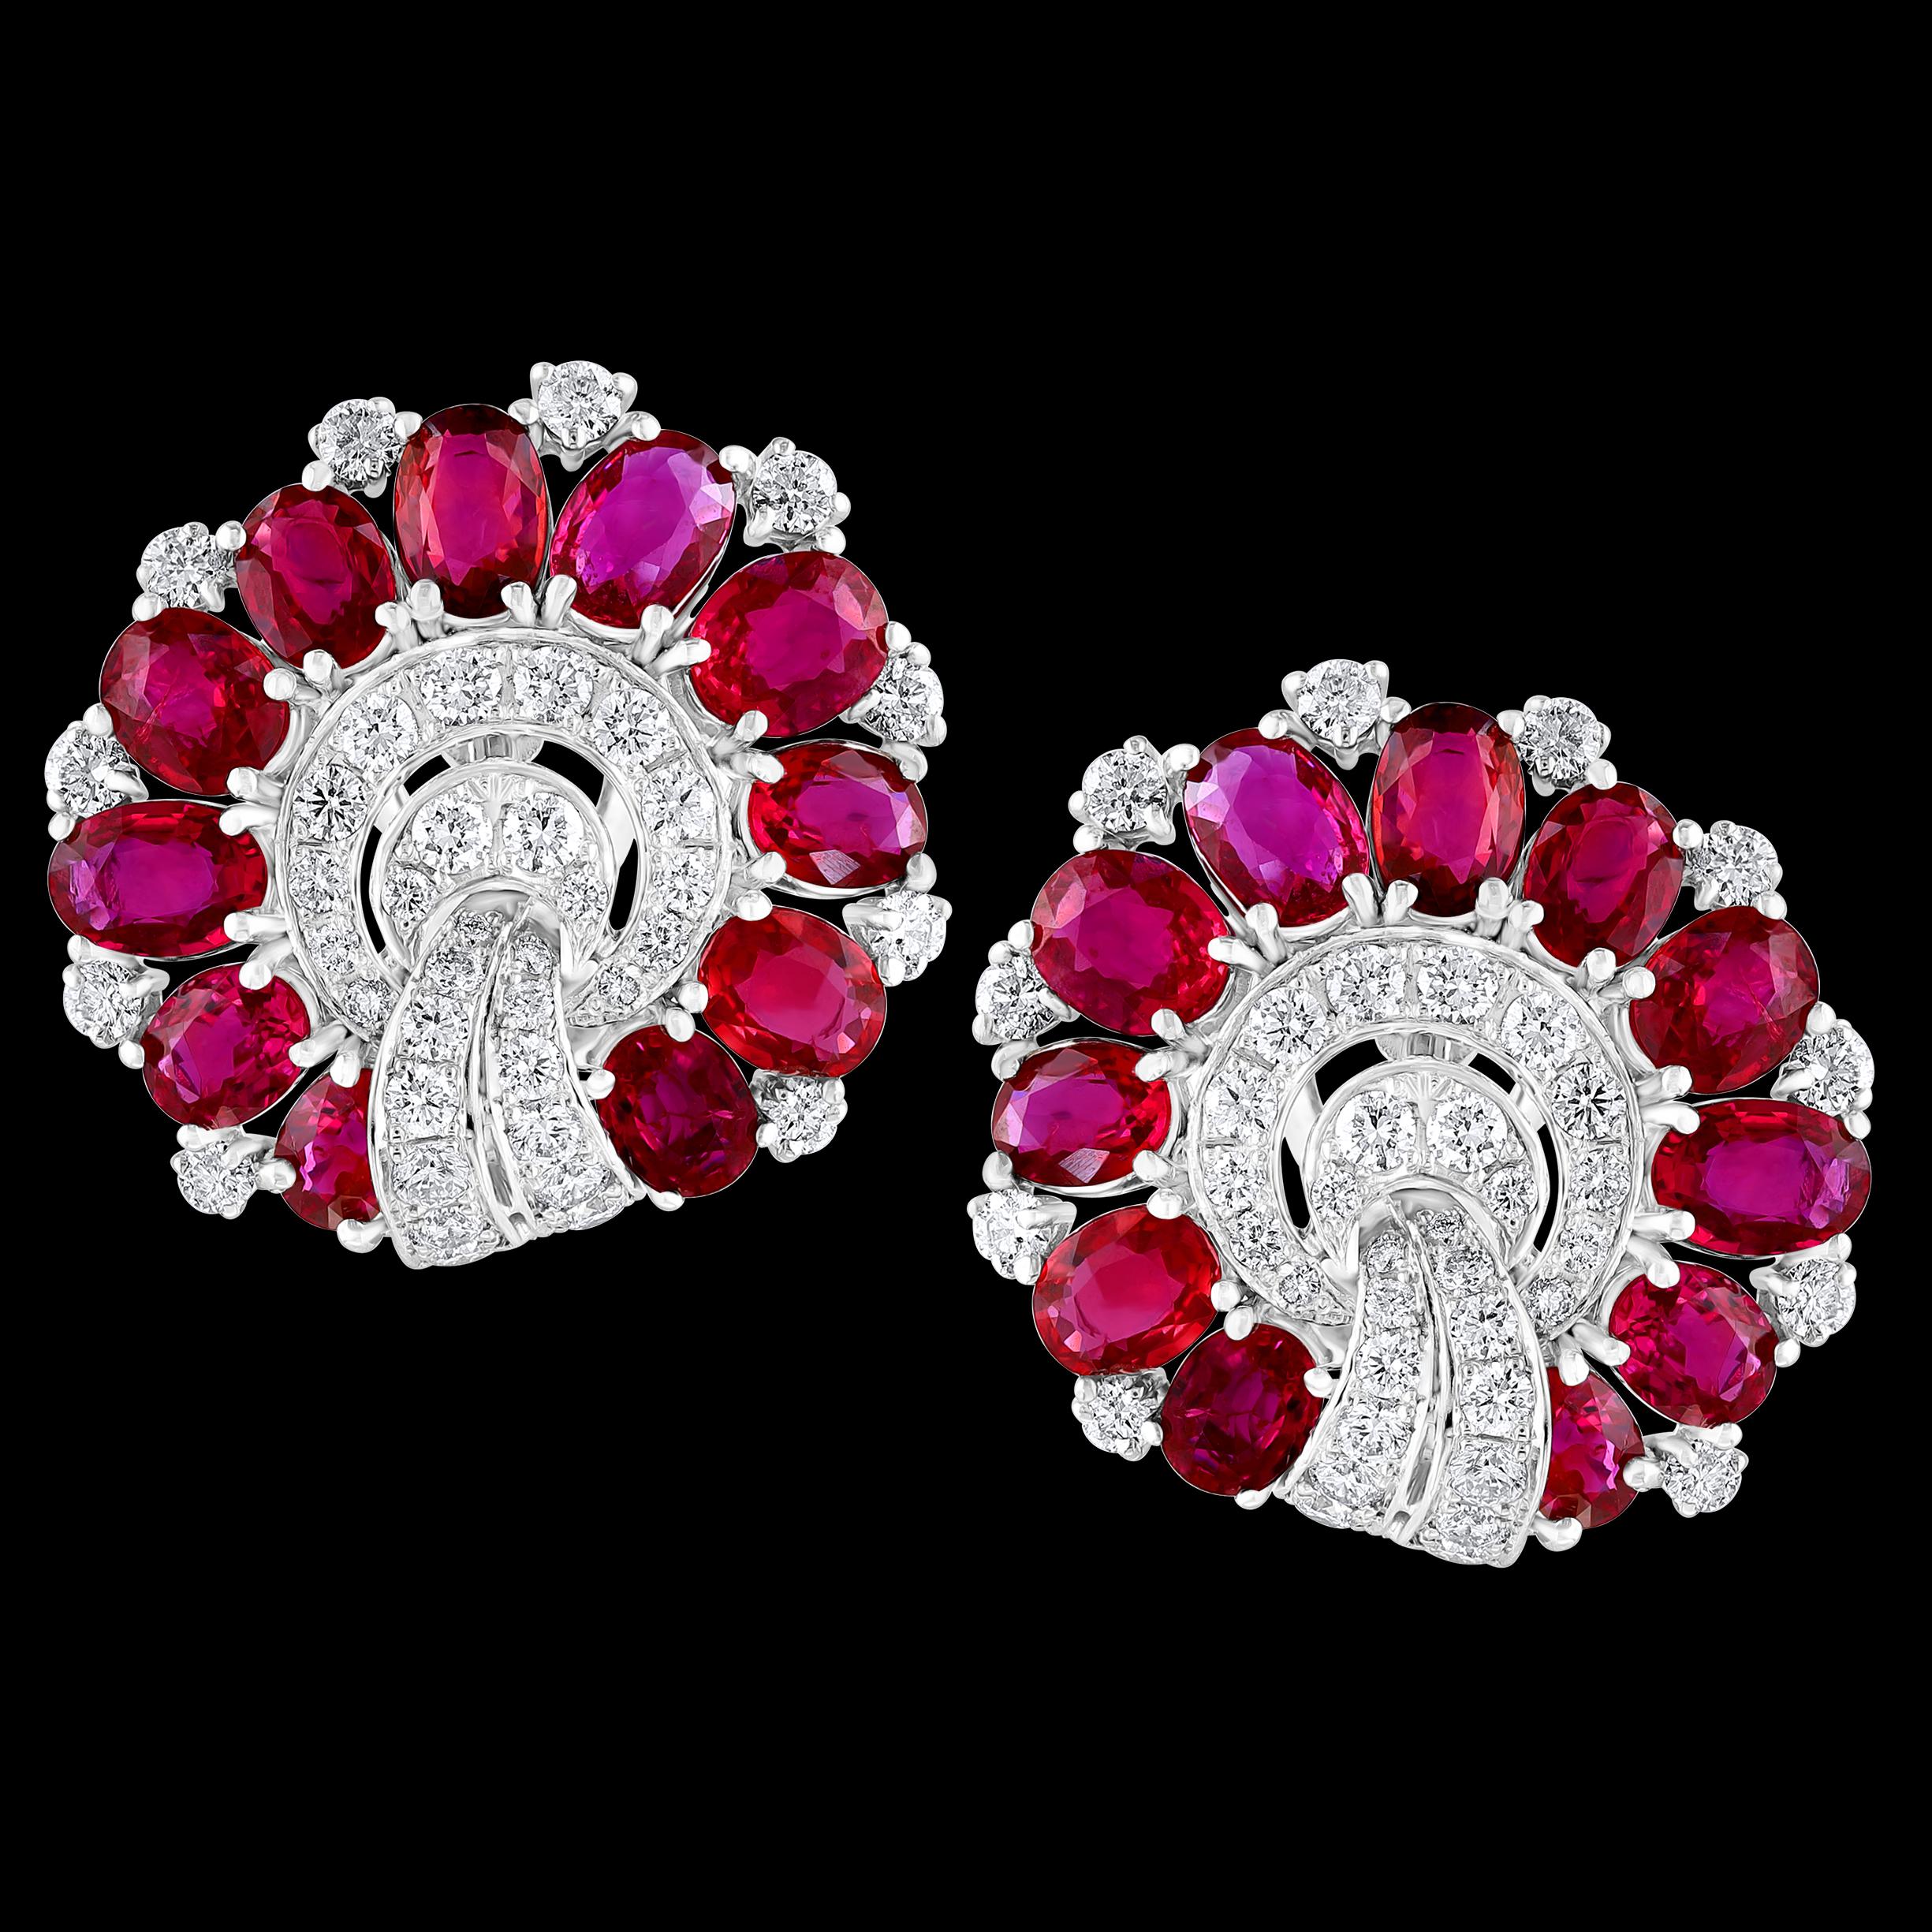 GIA Certified 13.78 Ct Natural Mozambique Ruby No Heat Diamond Earring in Platinum
GIA report # for origin is 2221519625
Natural Corundum
Natural Ruby 
origin Mazambique
 There are 22 Oval Rubies in the earring  ranging from 0.45 ct to 0.79 ct and